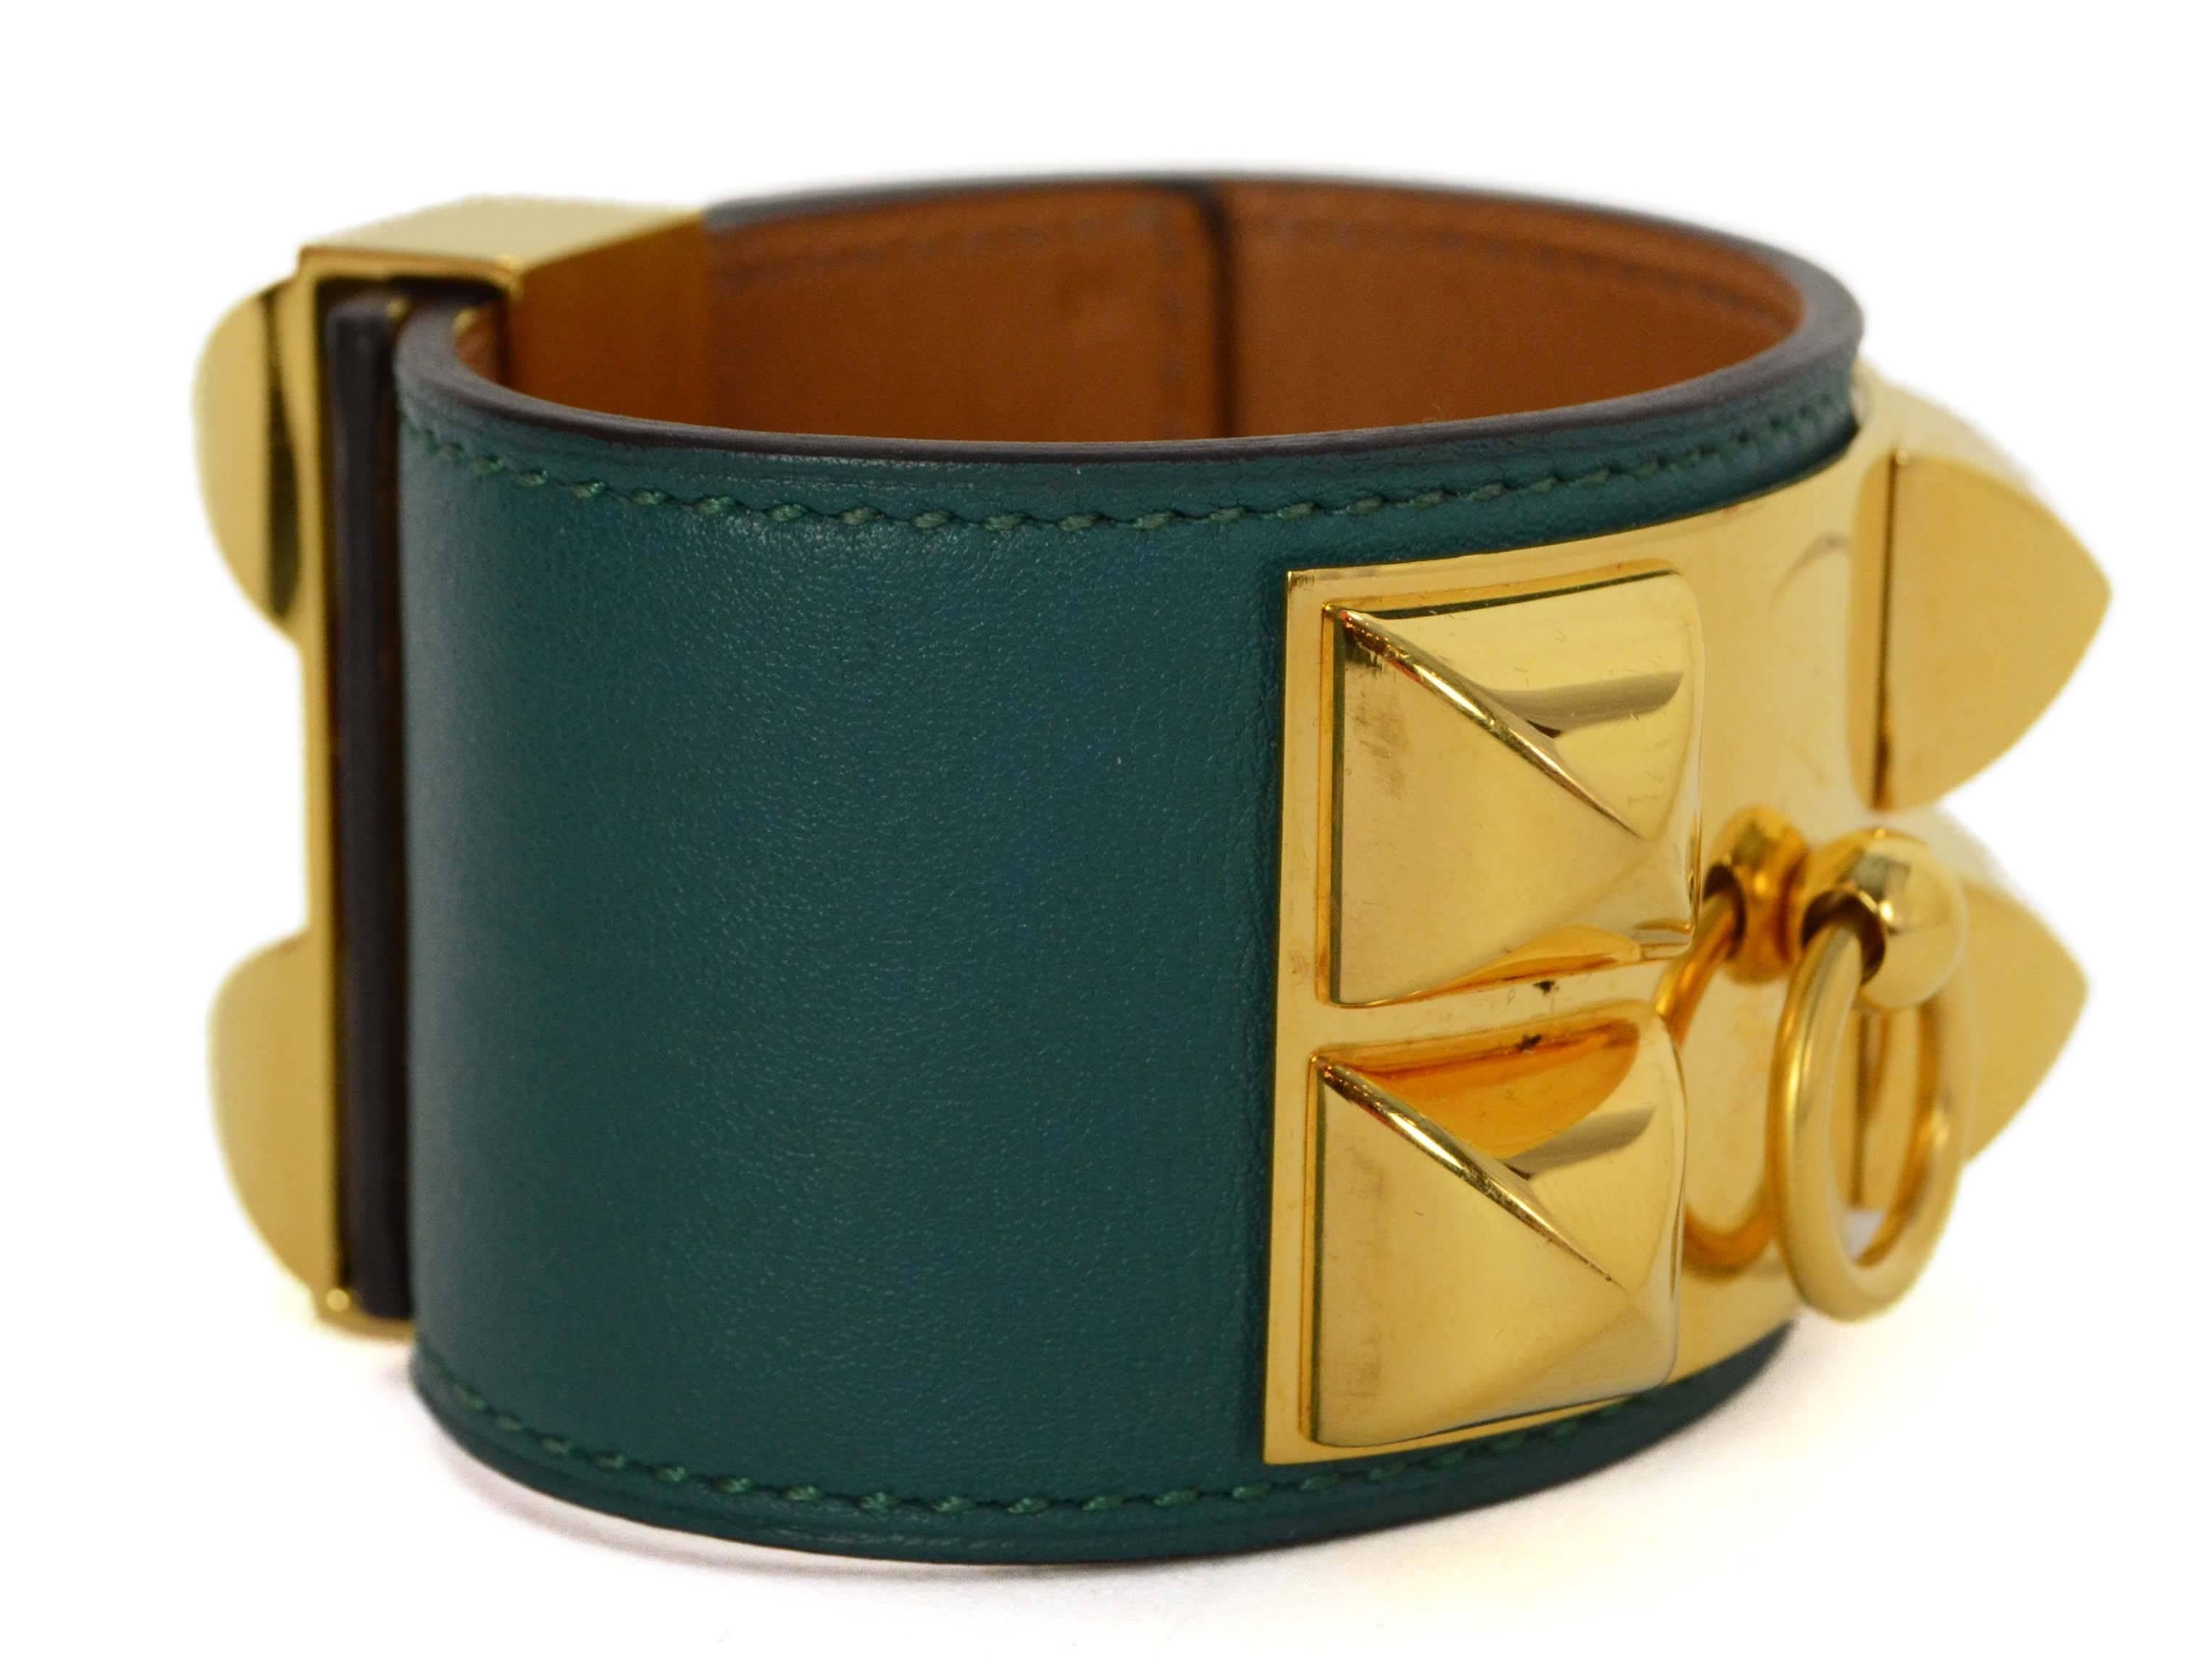 Hermes Malachite Swift CDC Cuff 
Made In: France
Year of Production: 2013
Color: Malachite green
Hardware: Goldtone
Materials: Swift leather and metal
Closure: Stud and notch closure
Stamp: Q stamp in square
Overall Condition: Excellent